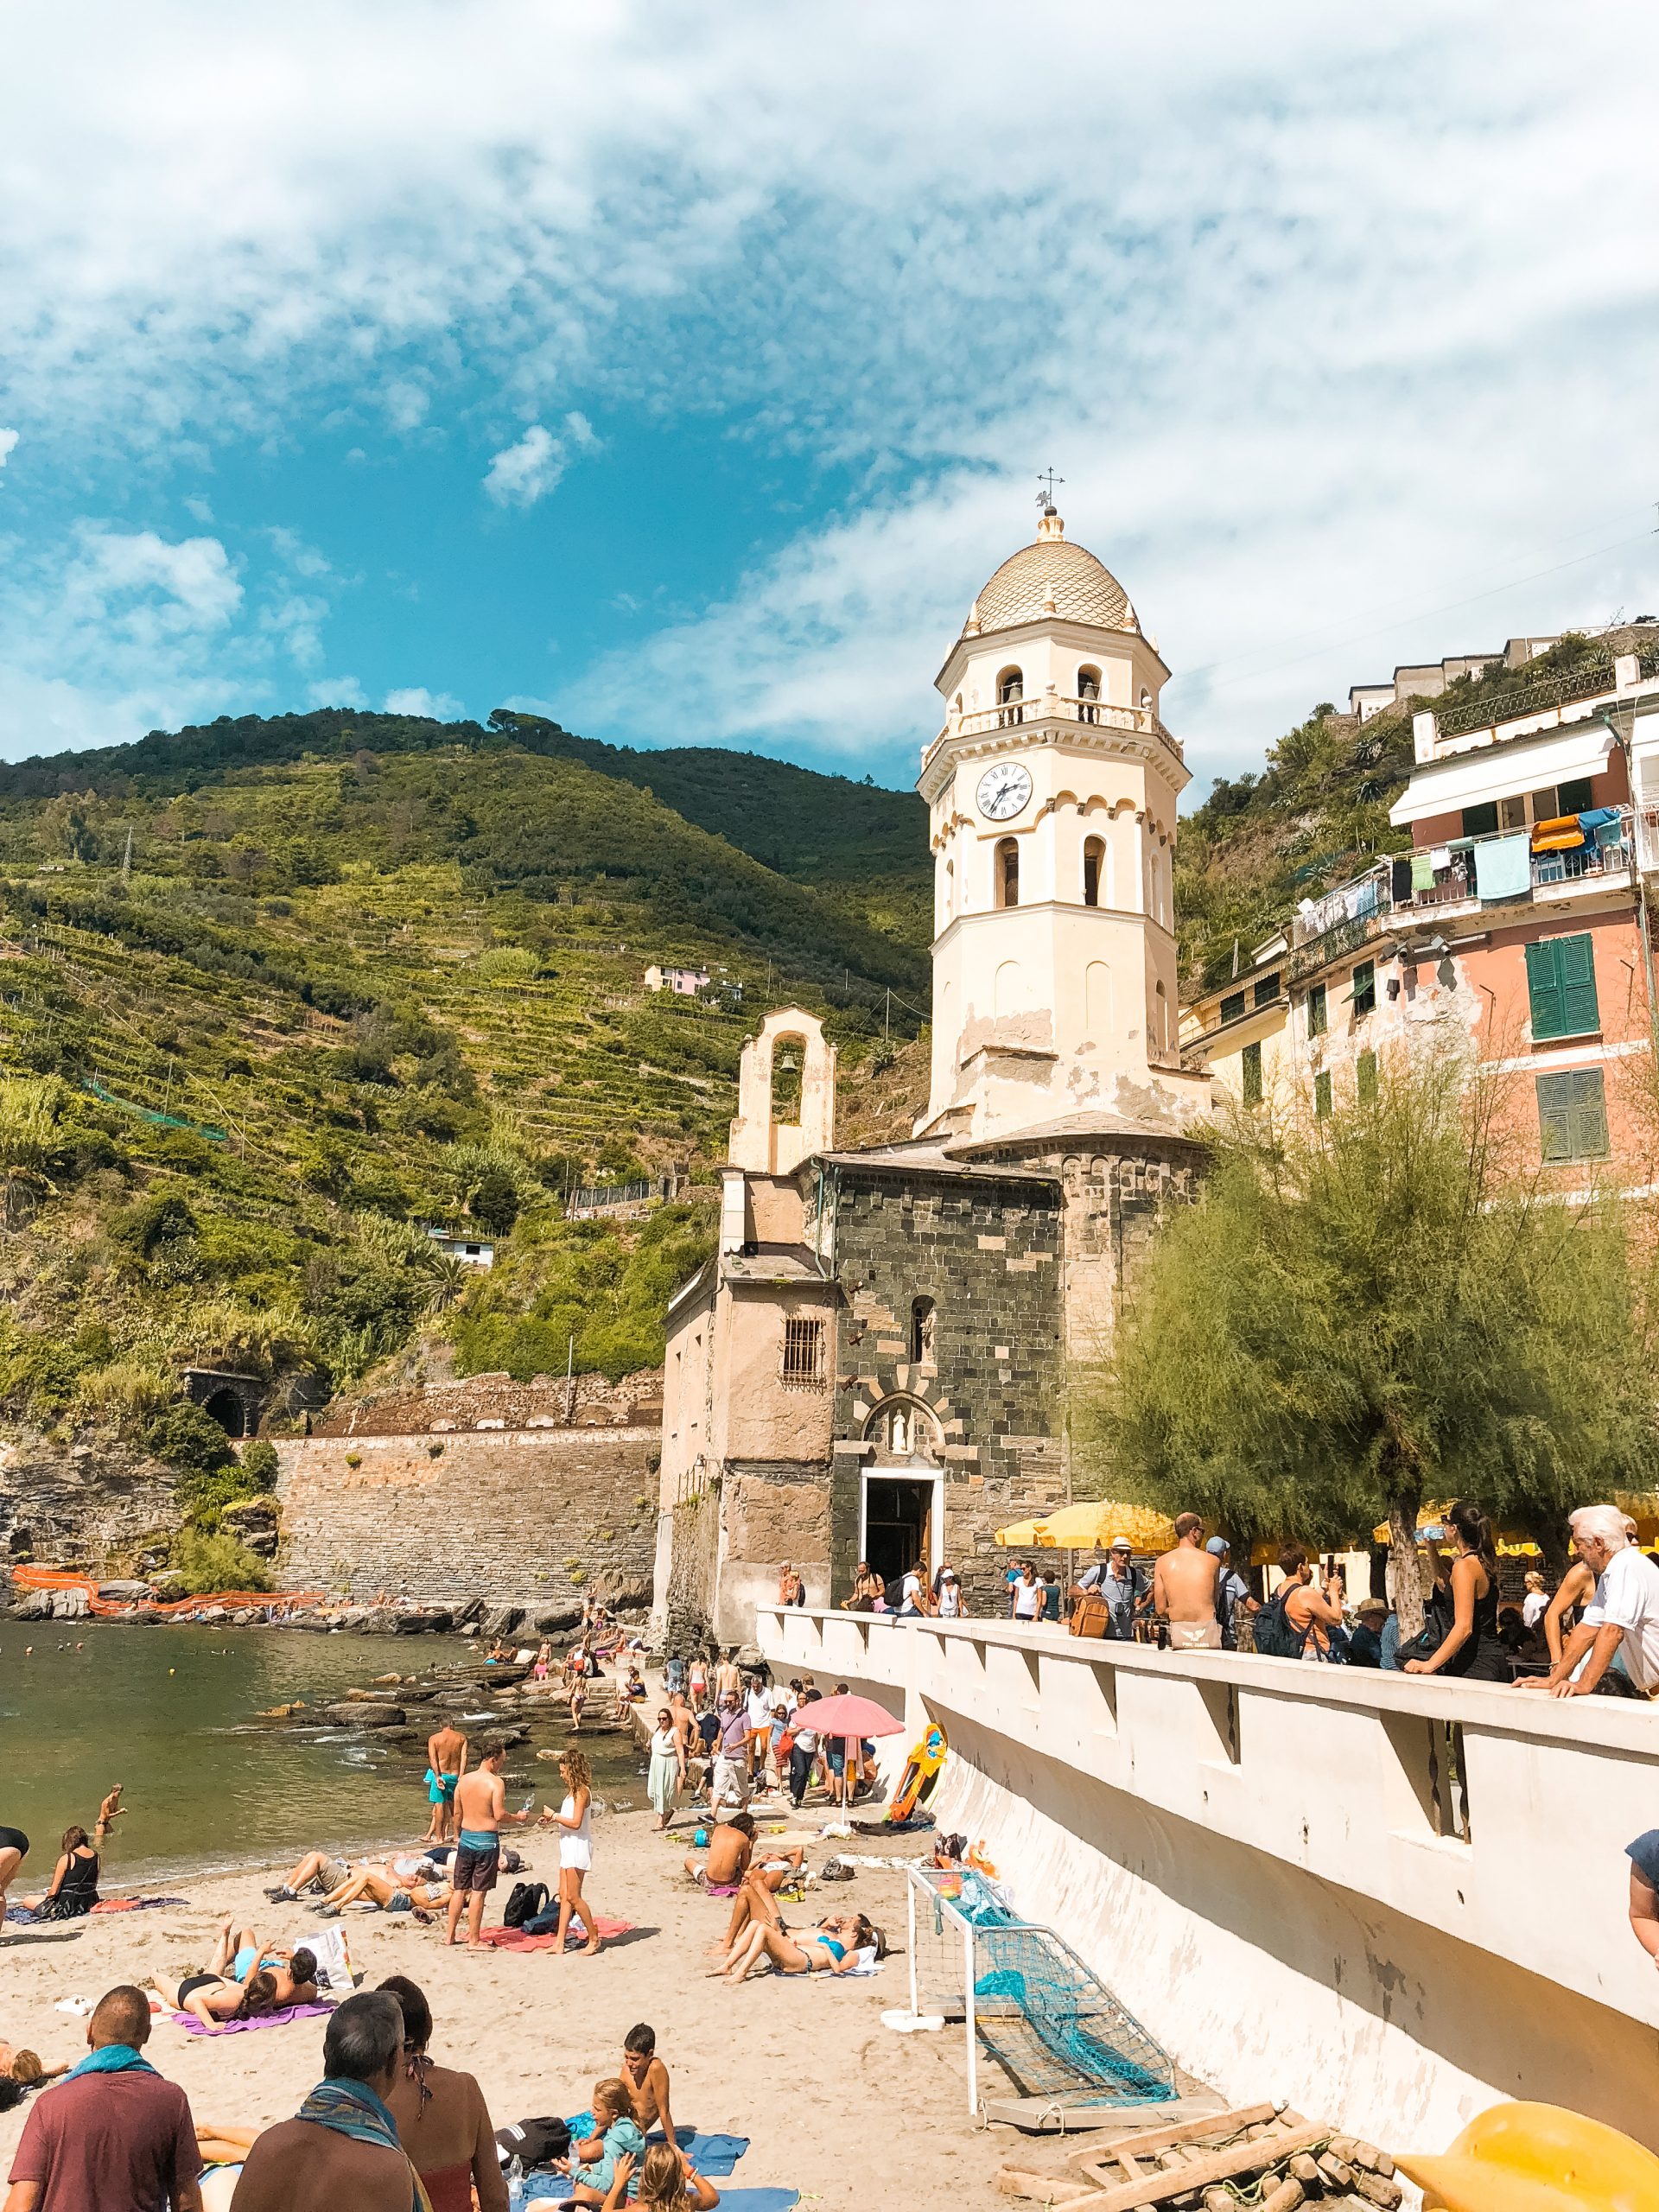 the iconic yellow building in the harbor of Vernazza